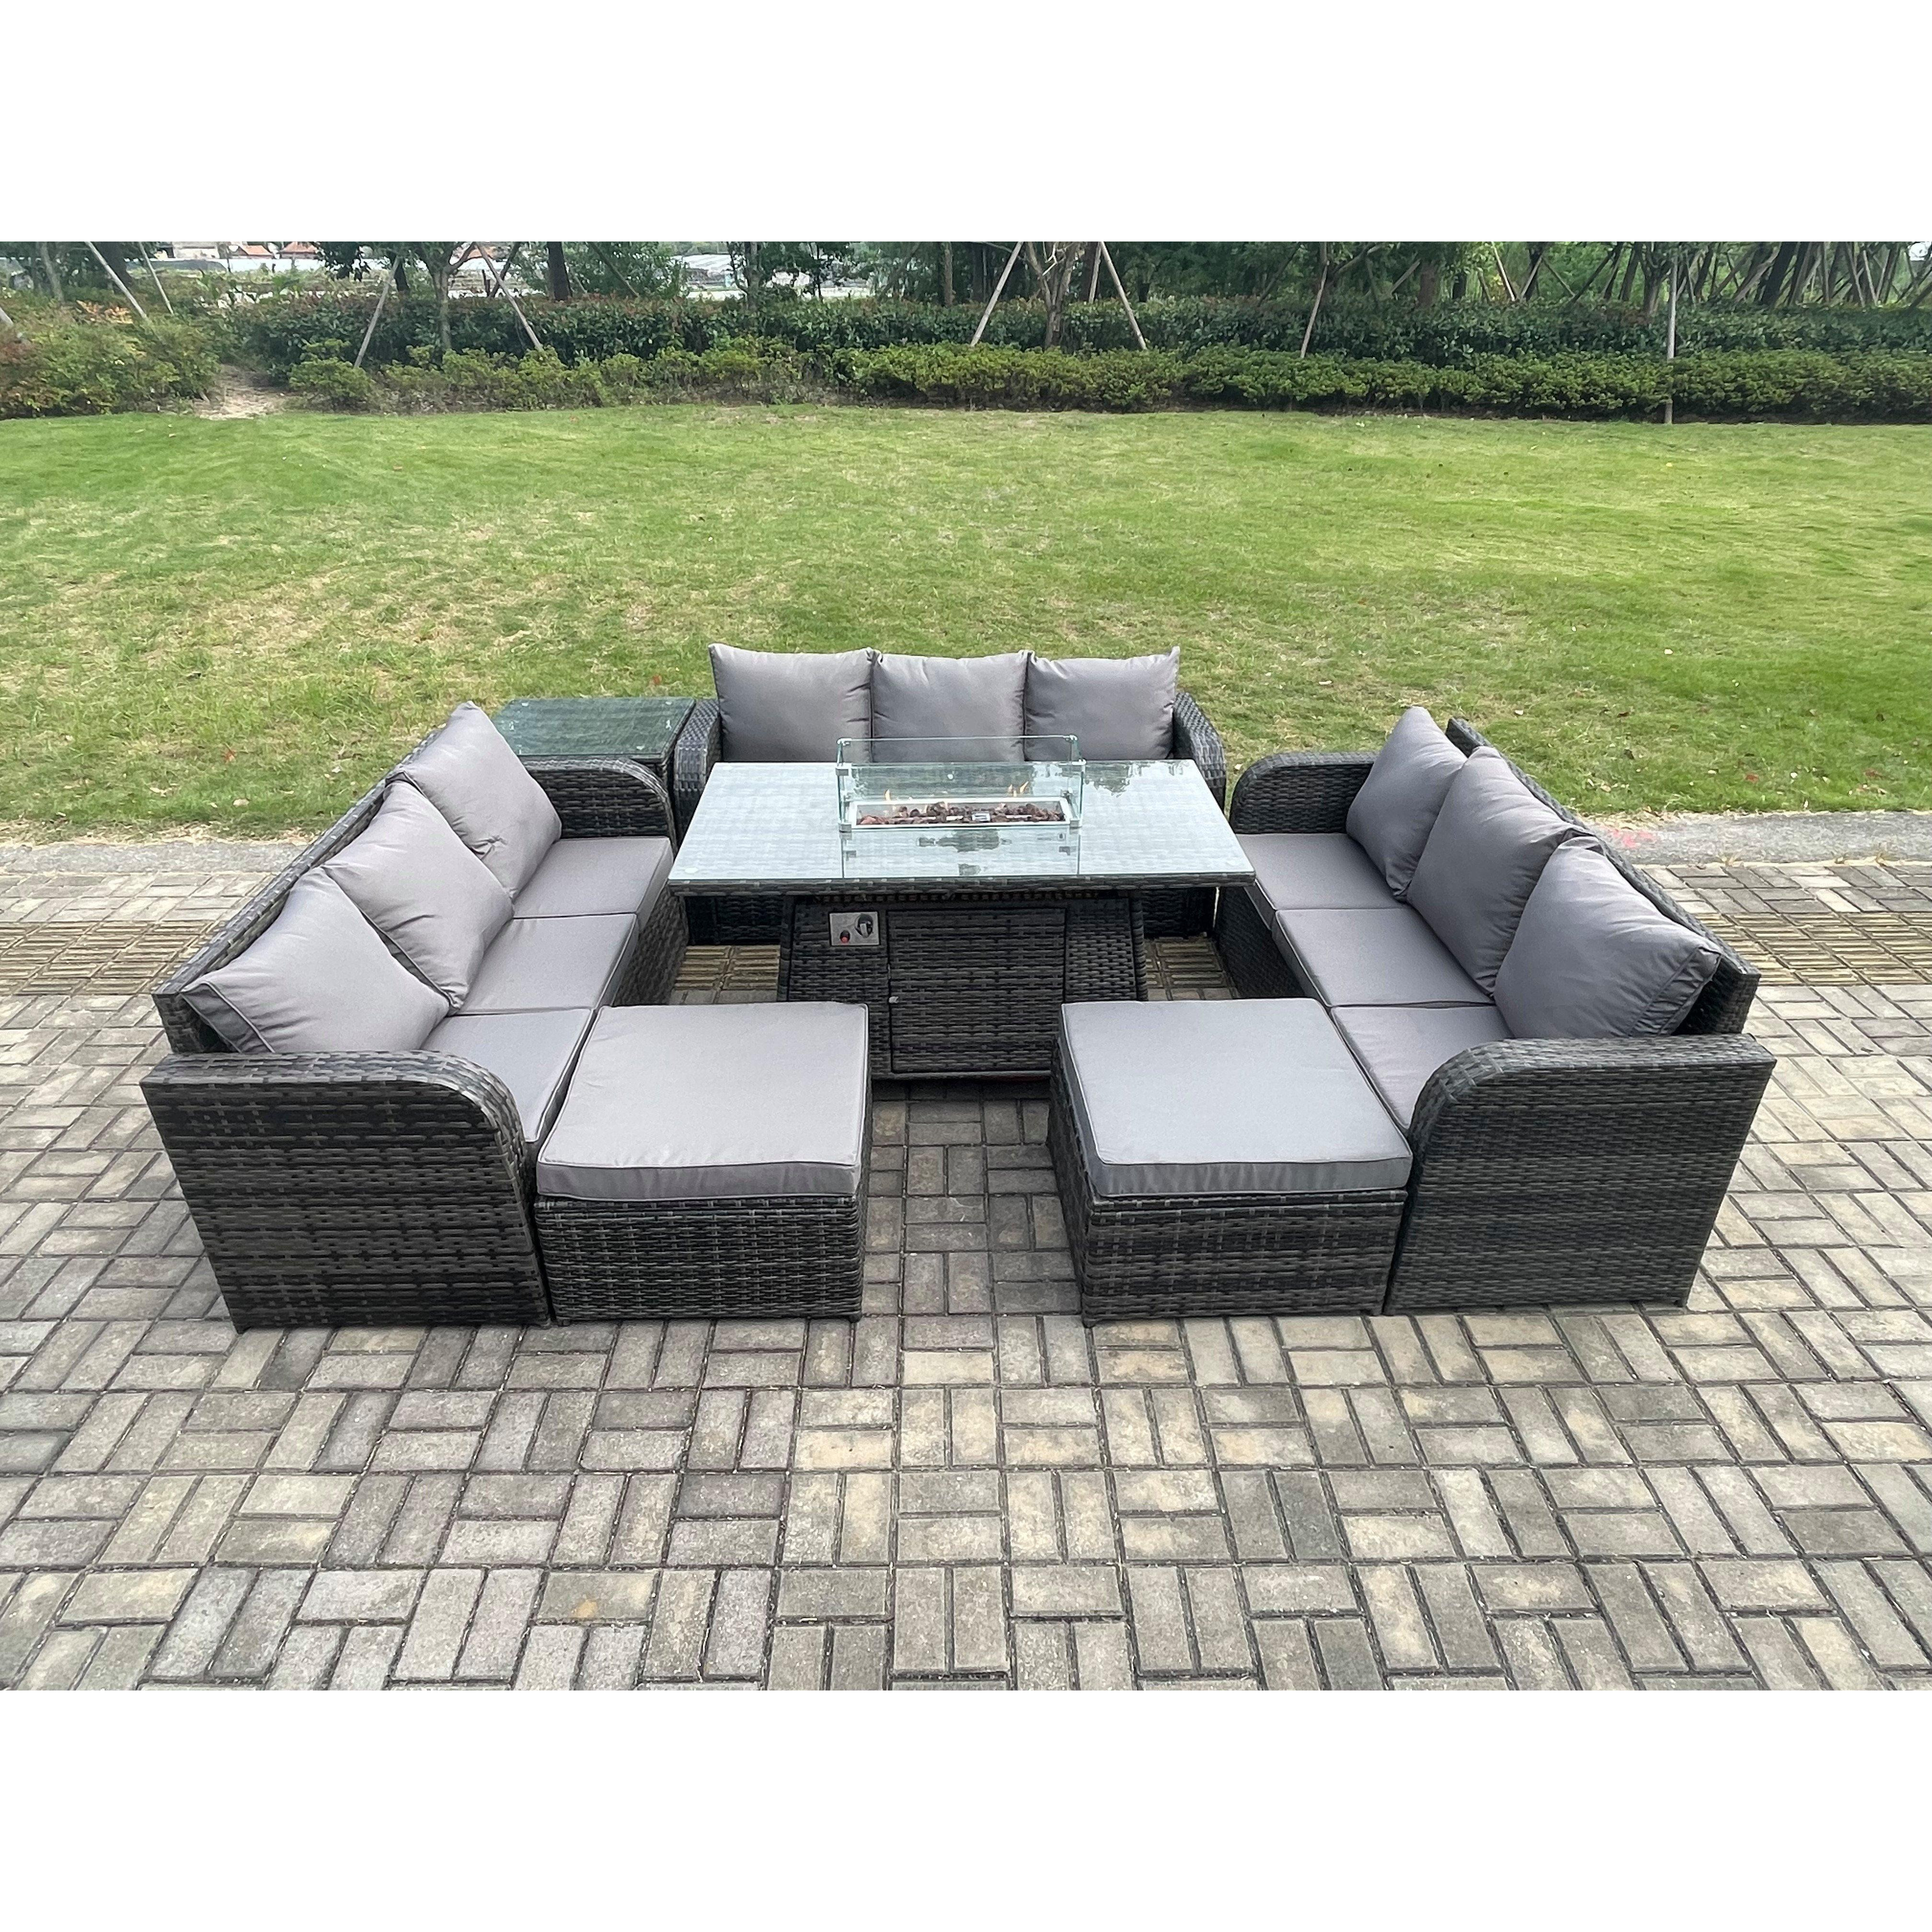 Outdoor Rattan Furniture Garden Dining Set Gas Fire Pit Table With Side Table Lounge Sofa 2 Big Footstool - image 1